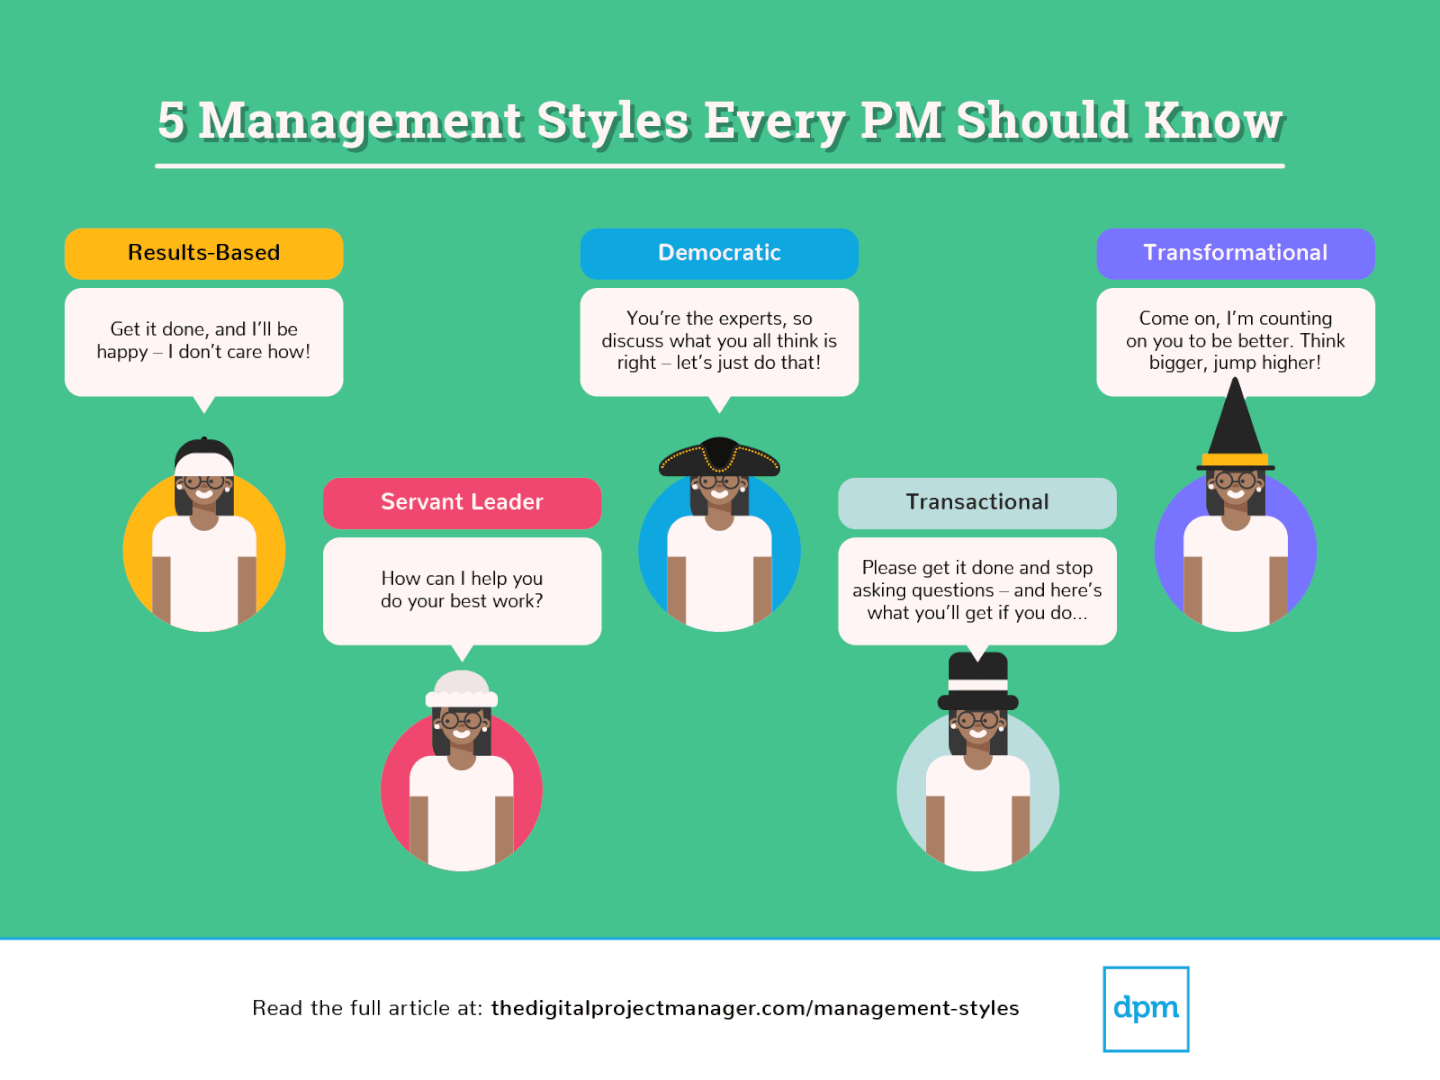 Which management style is best?